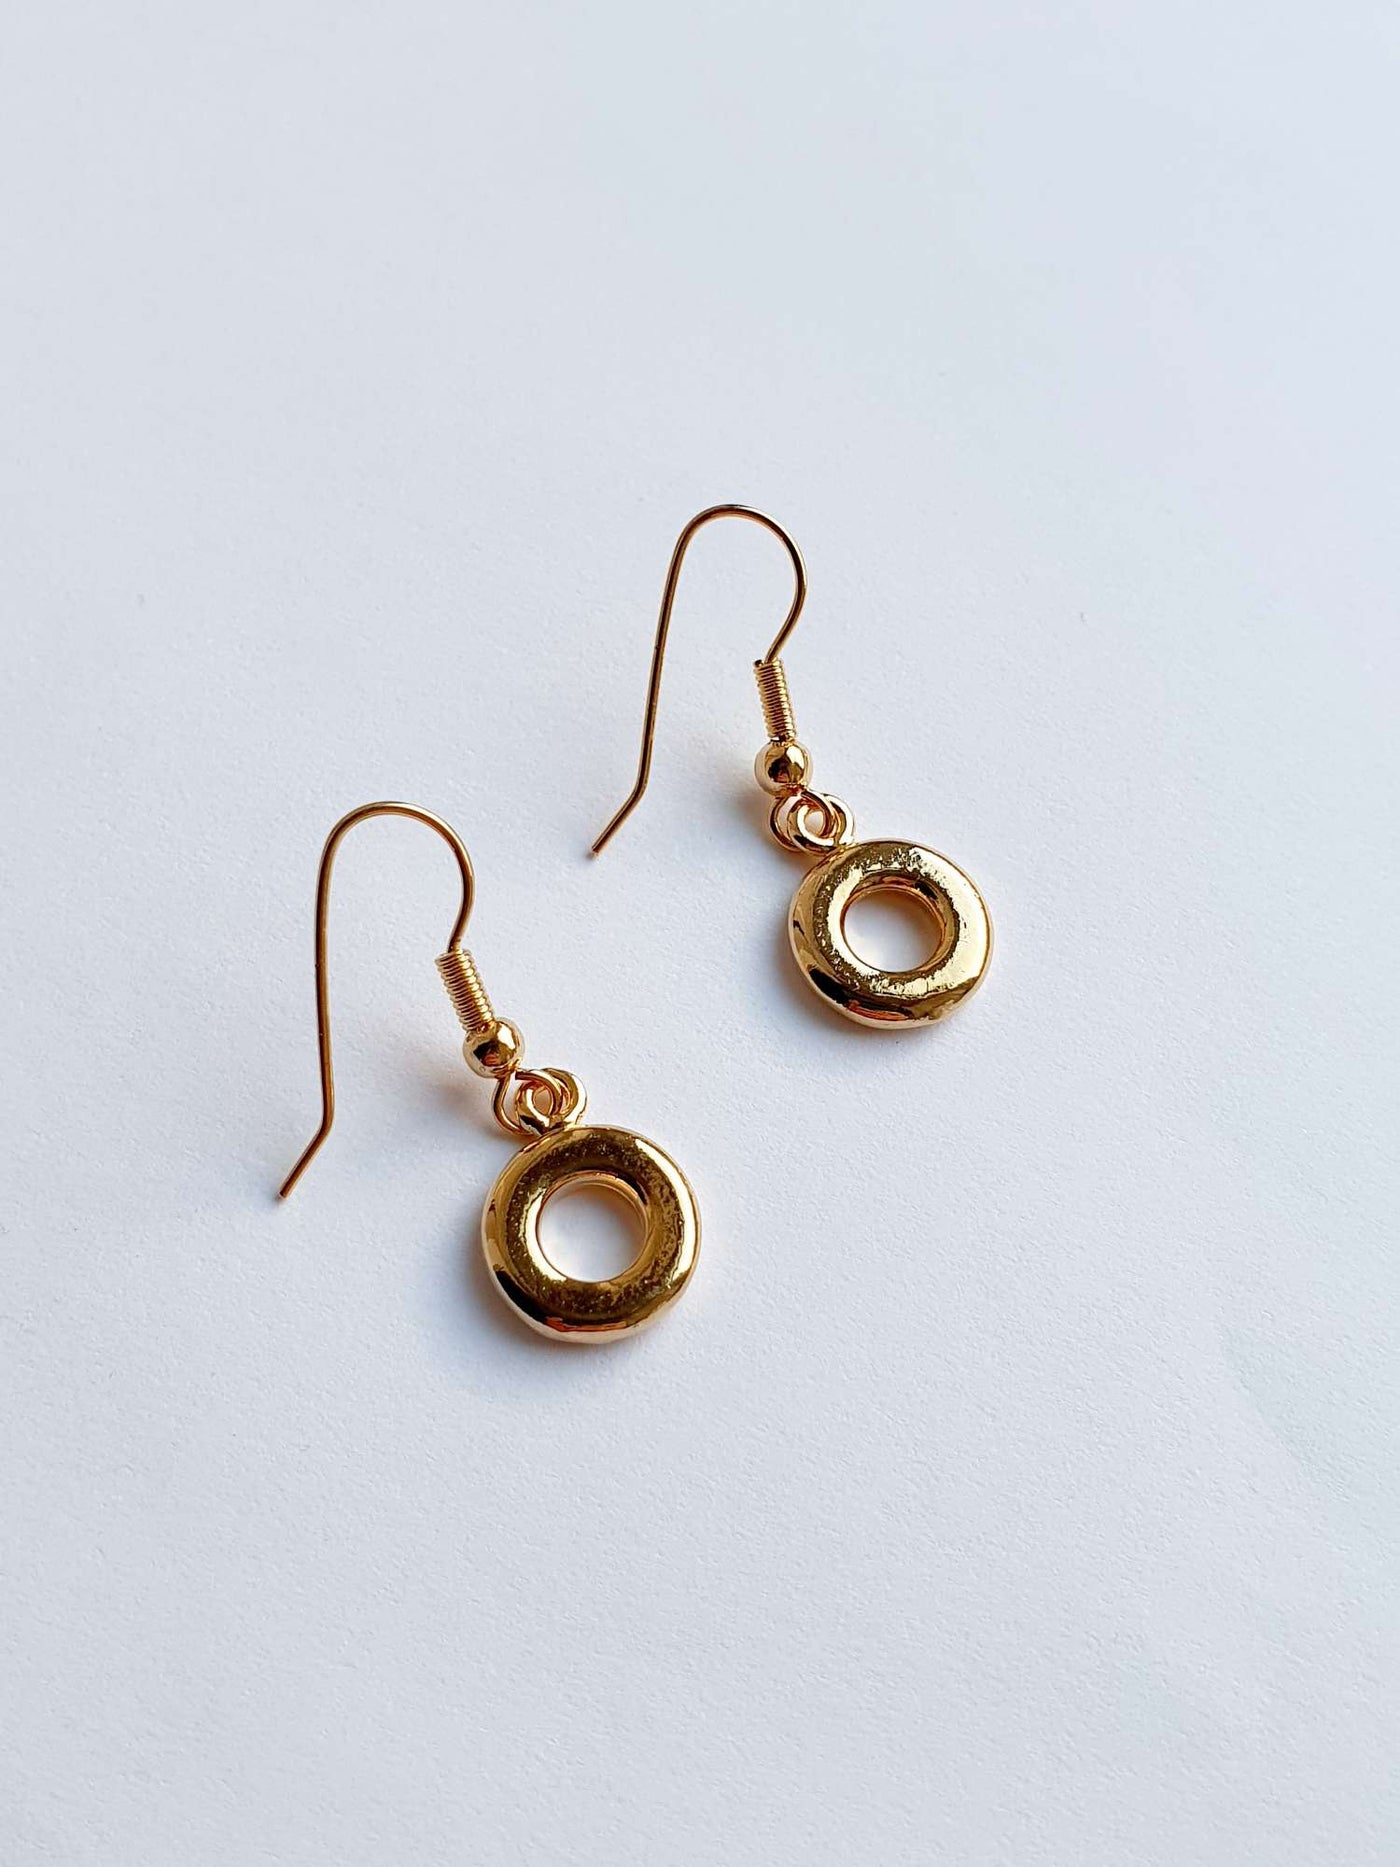 Vintage Gold Plated Drop Earrings with Circle Charm